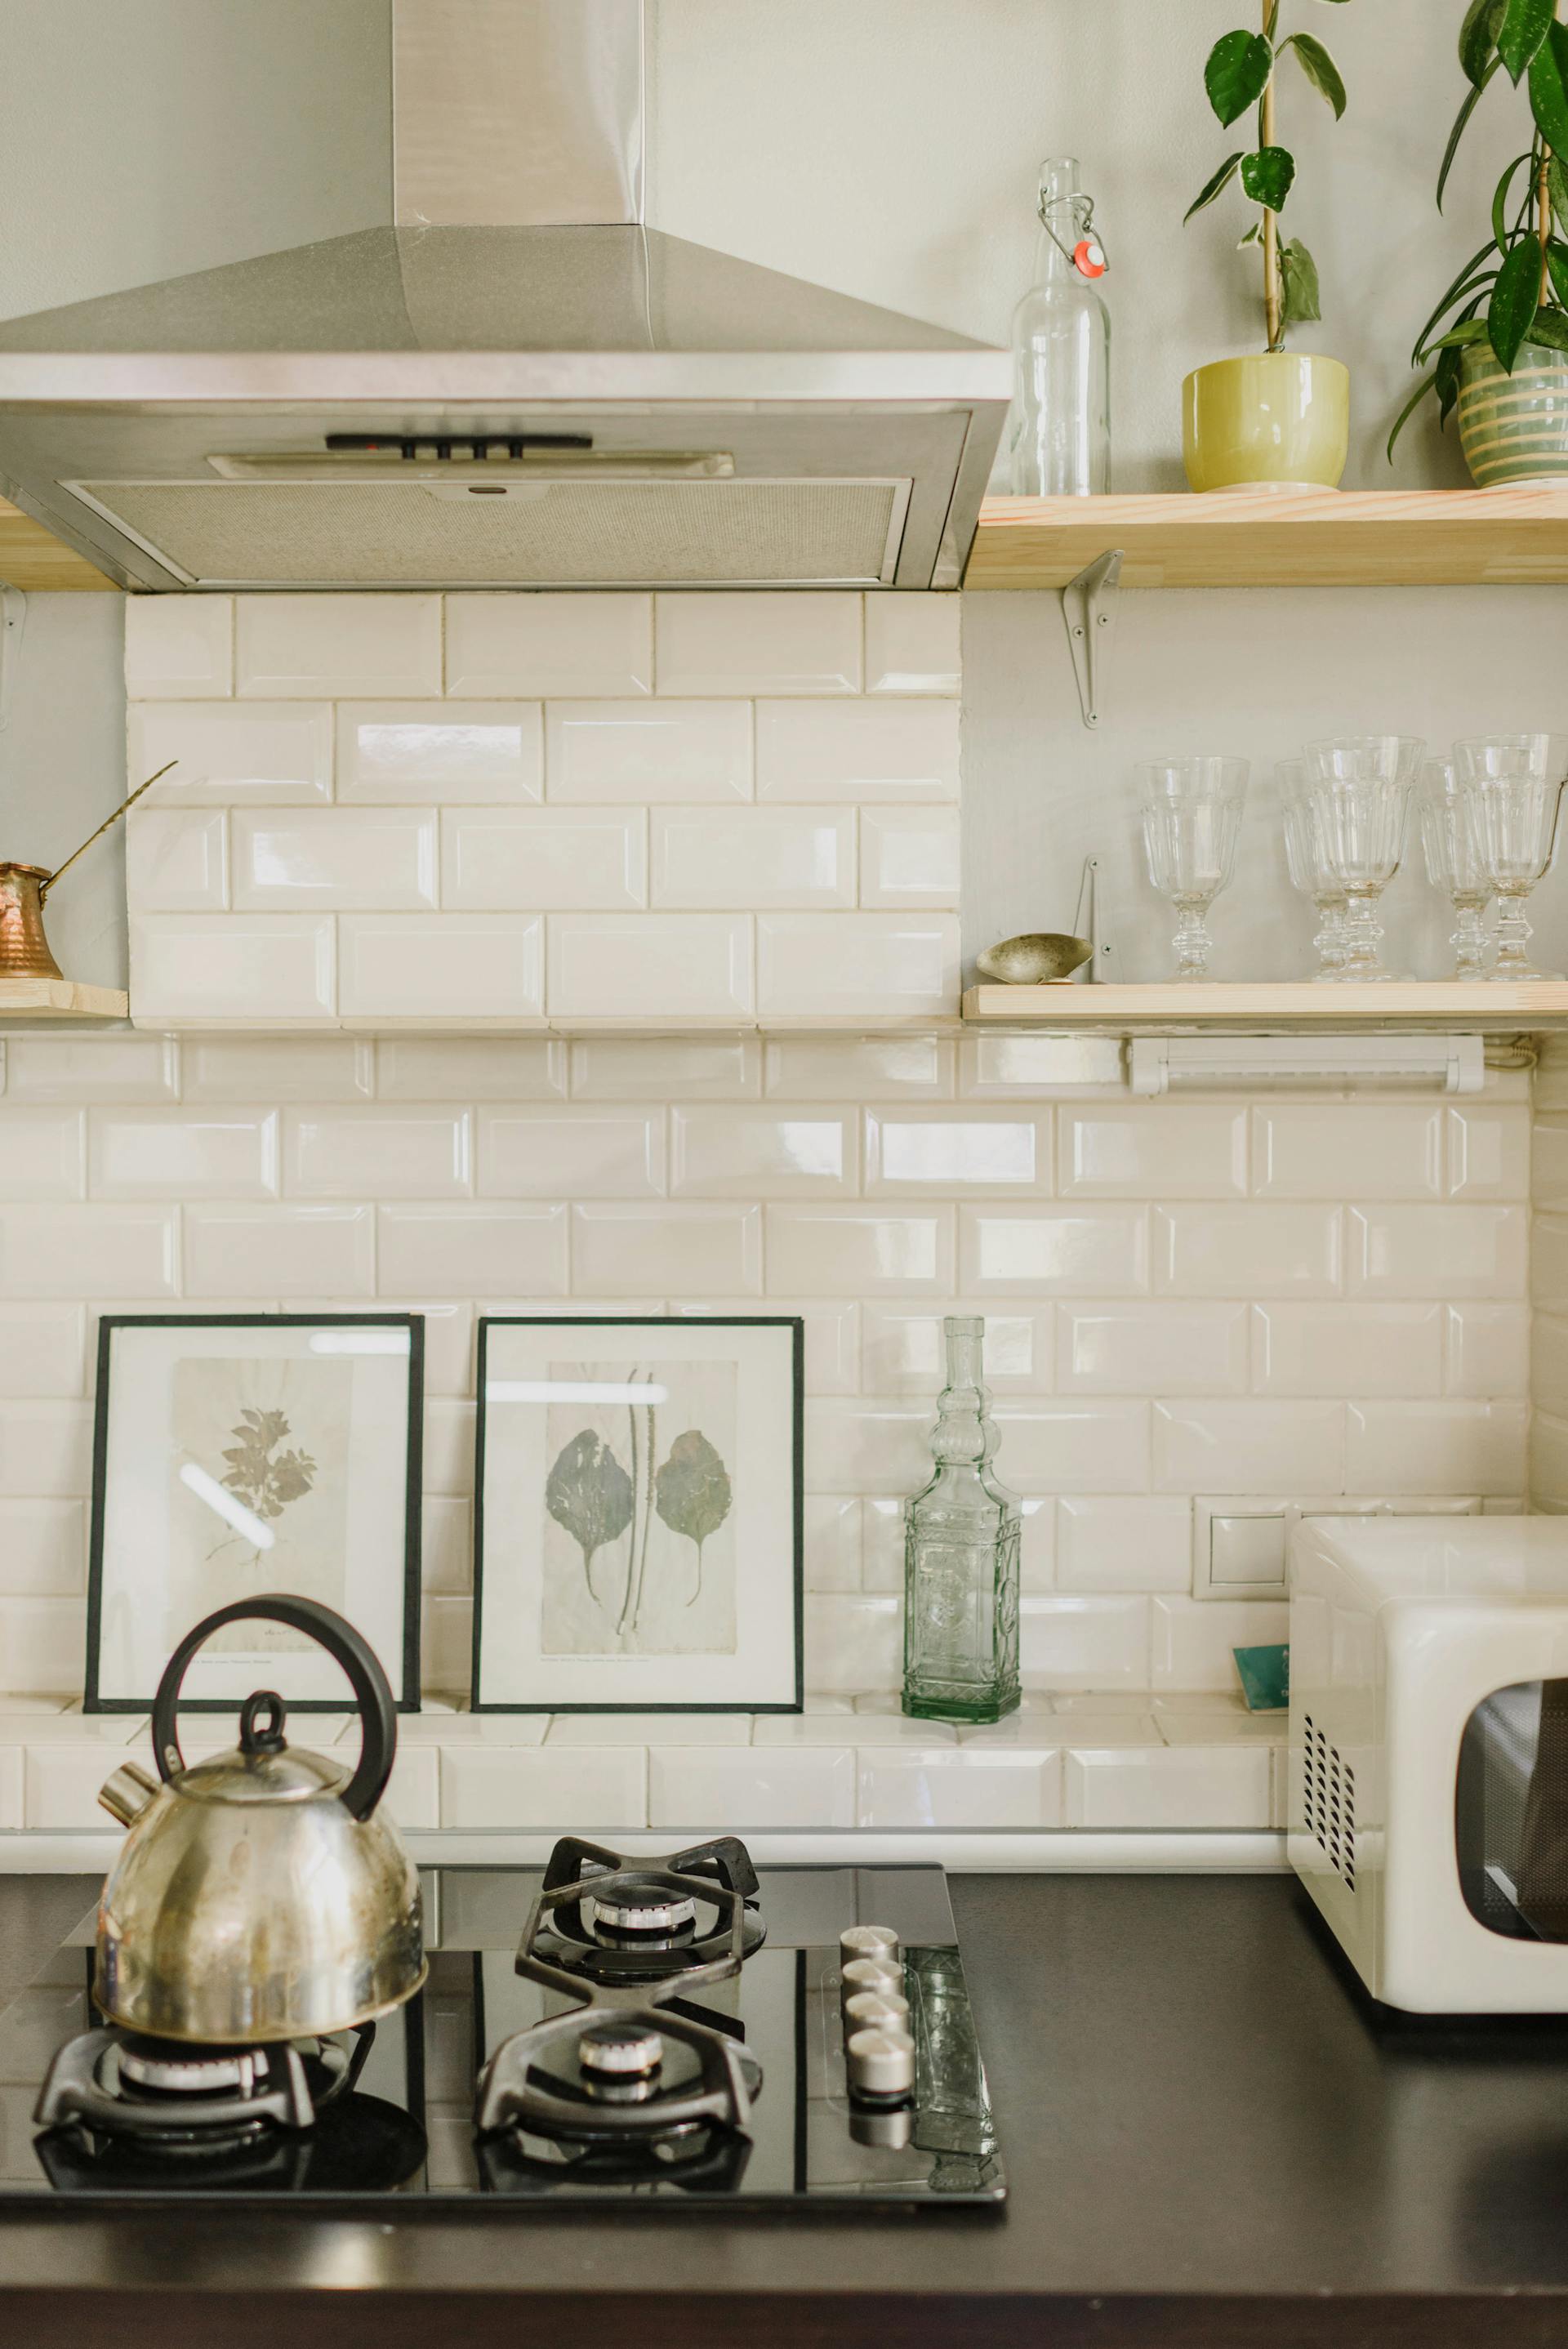 A clean kitchen counter | Source: Pexels